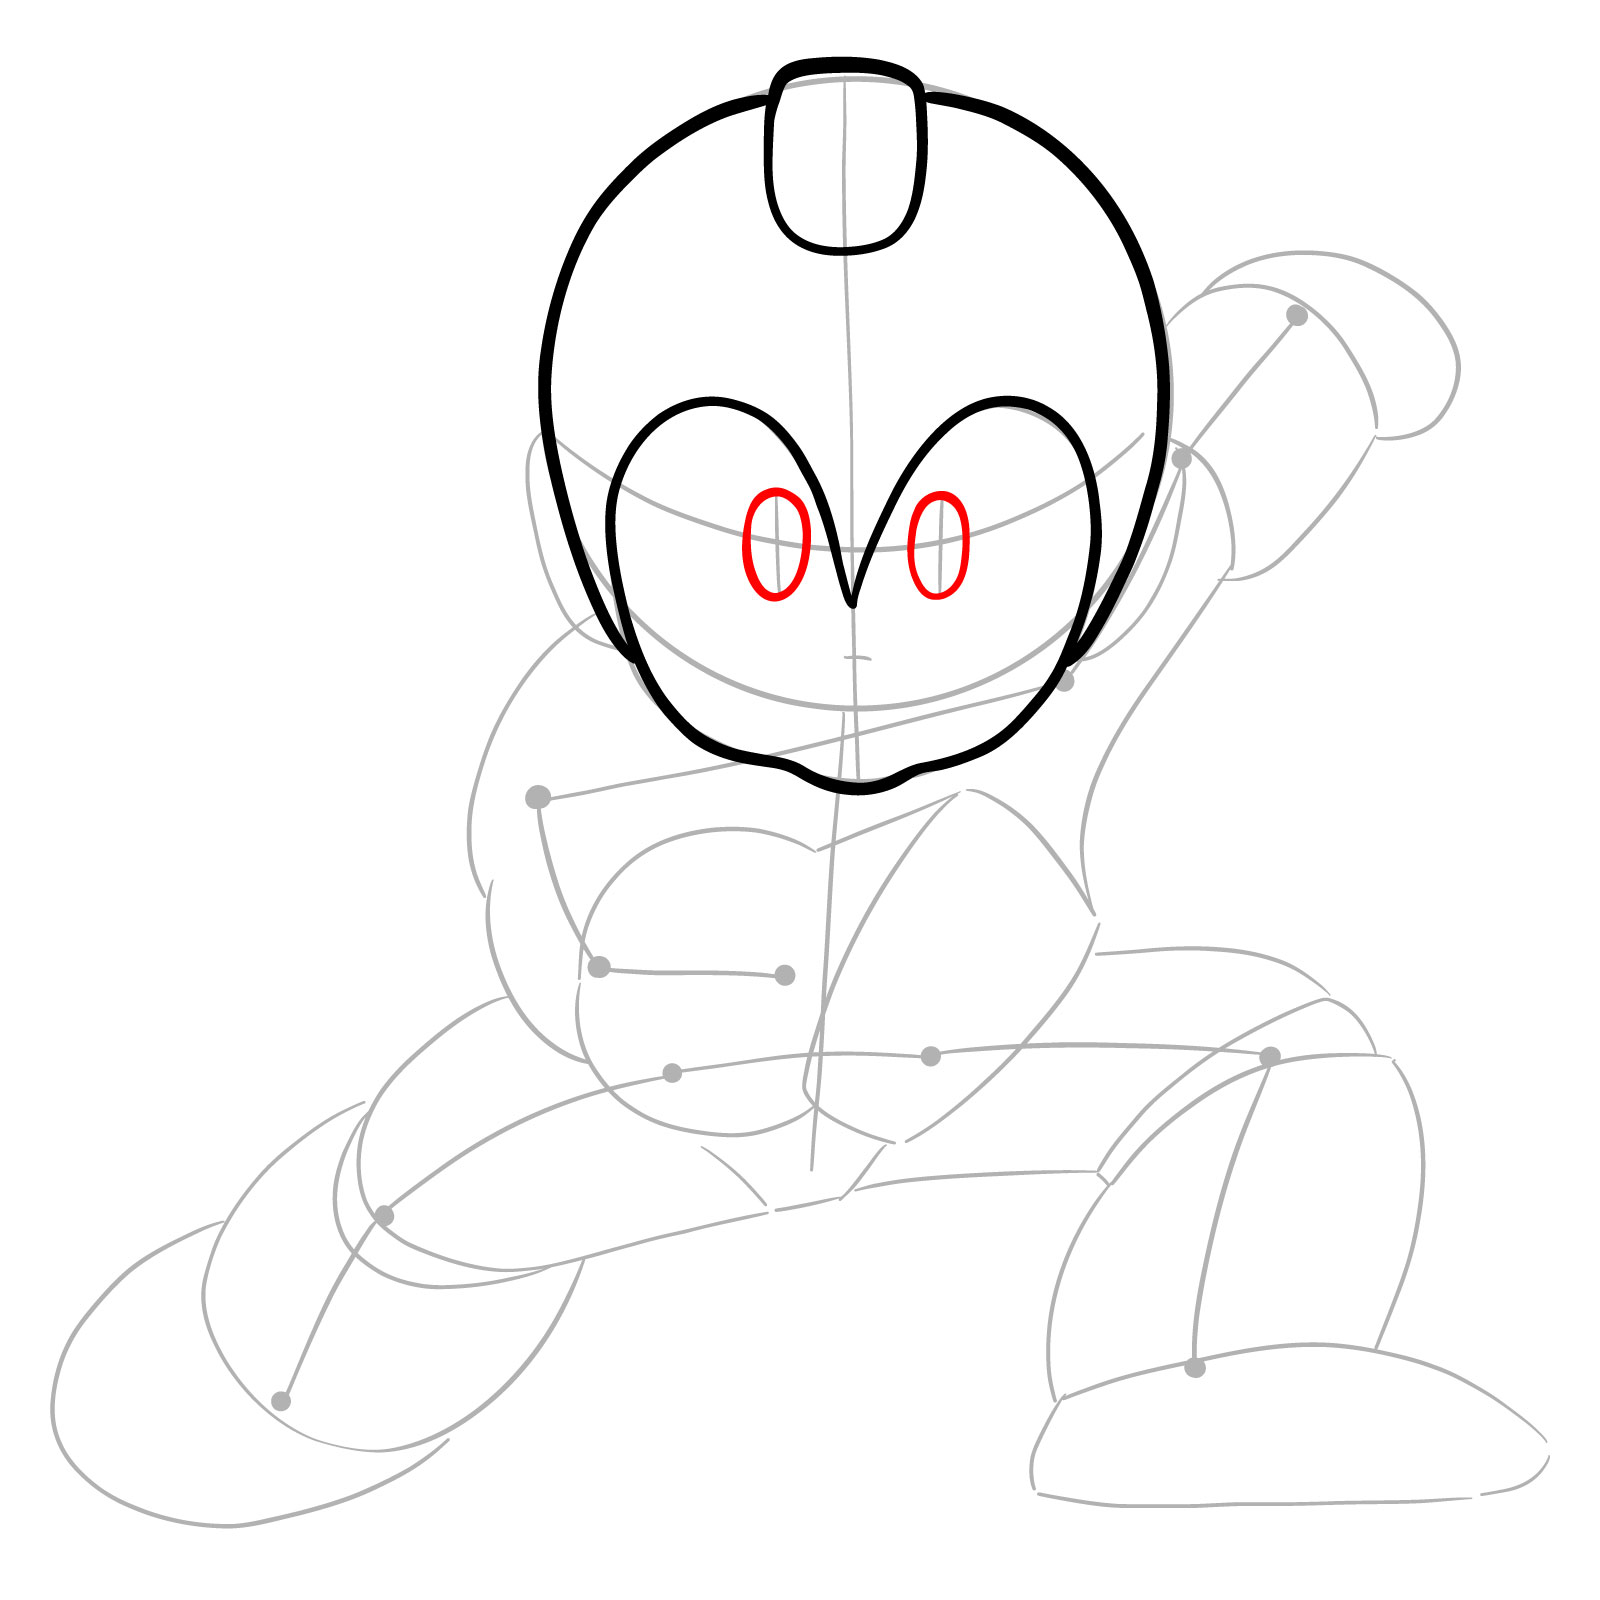 How to draw Mega Man from the original game - step 06